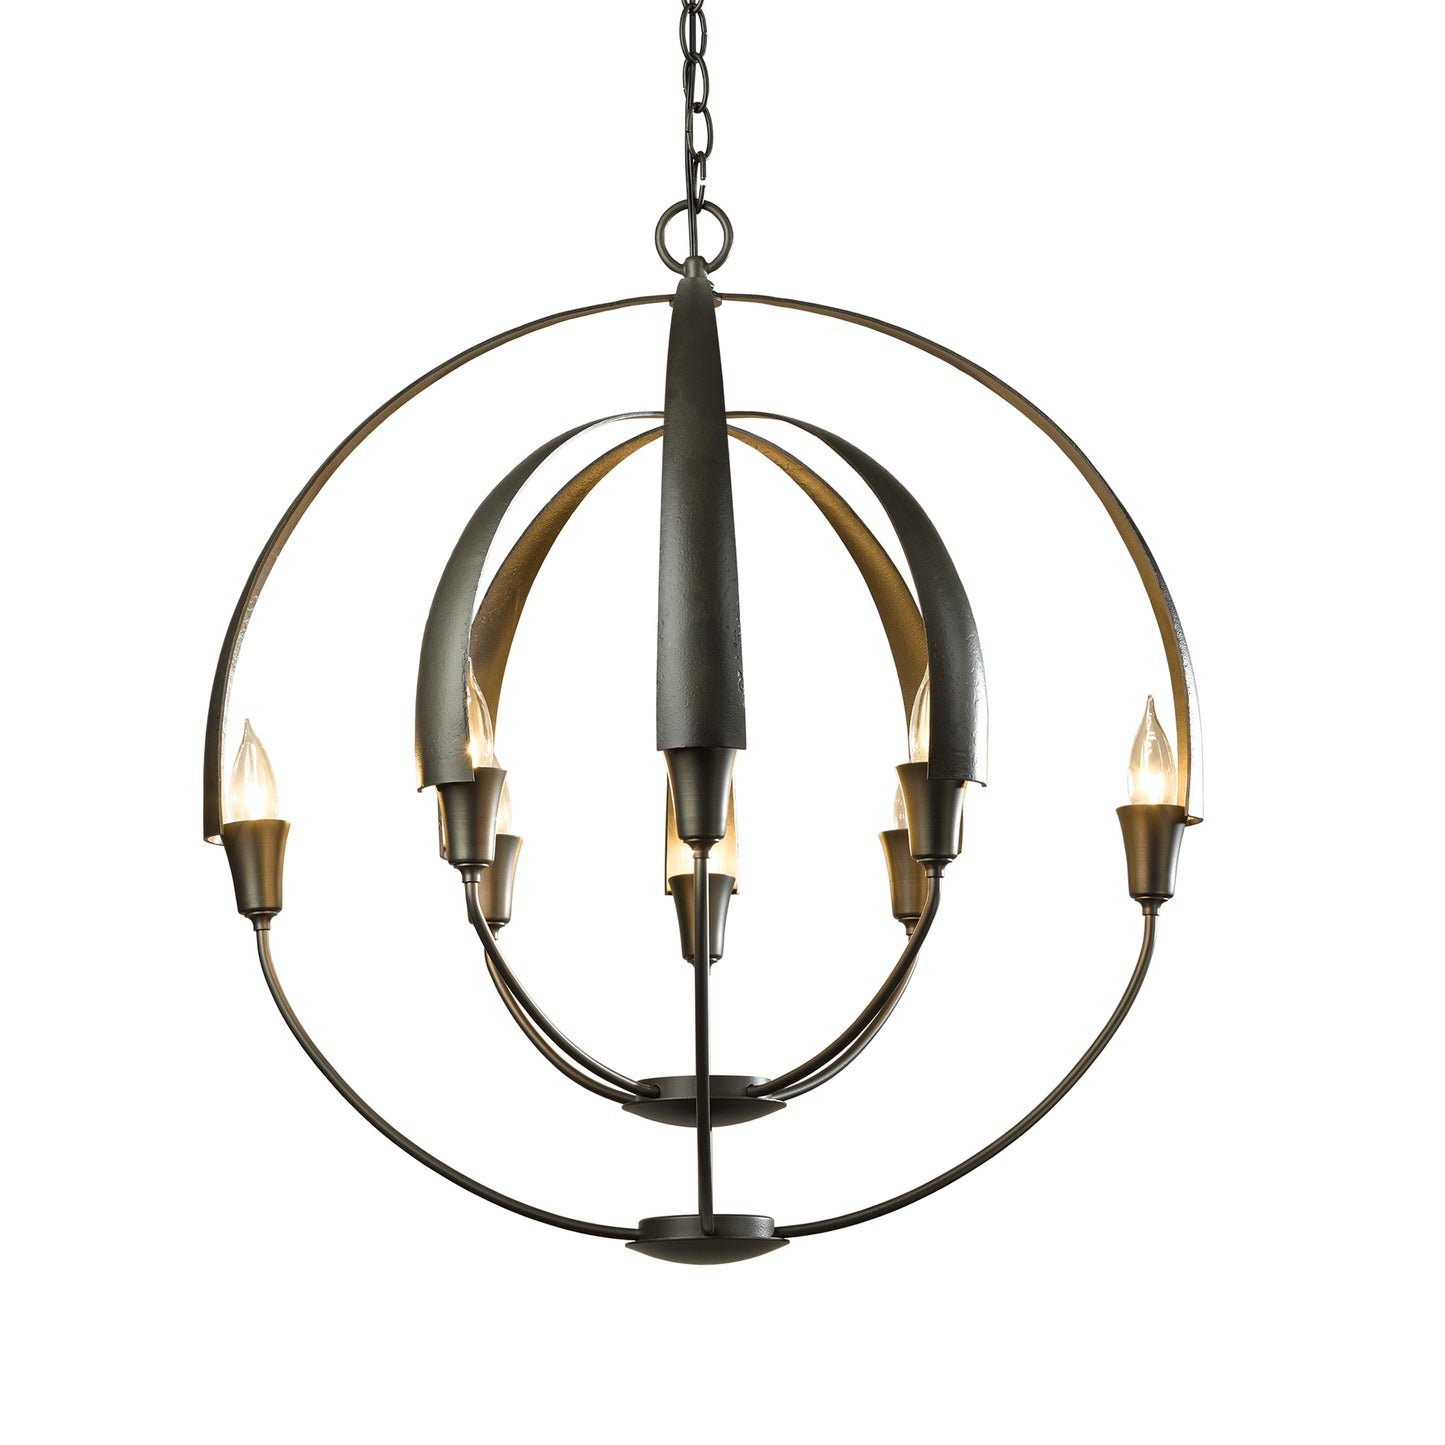 The Hubbardton Forge Double Cirque Chandelier with a metal frame and four candle holders is a striking addition to any space in Vermont.